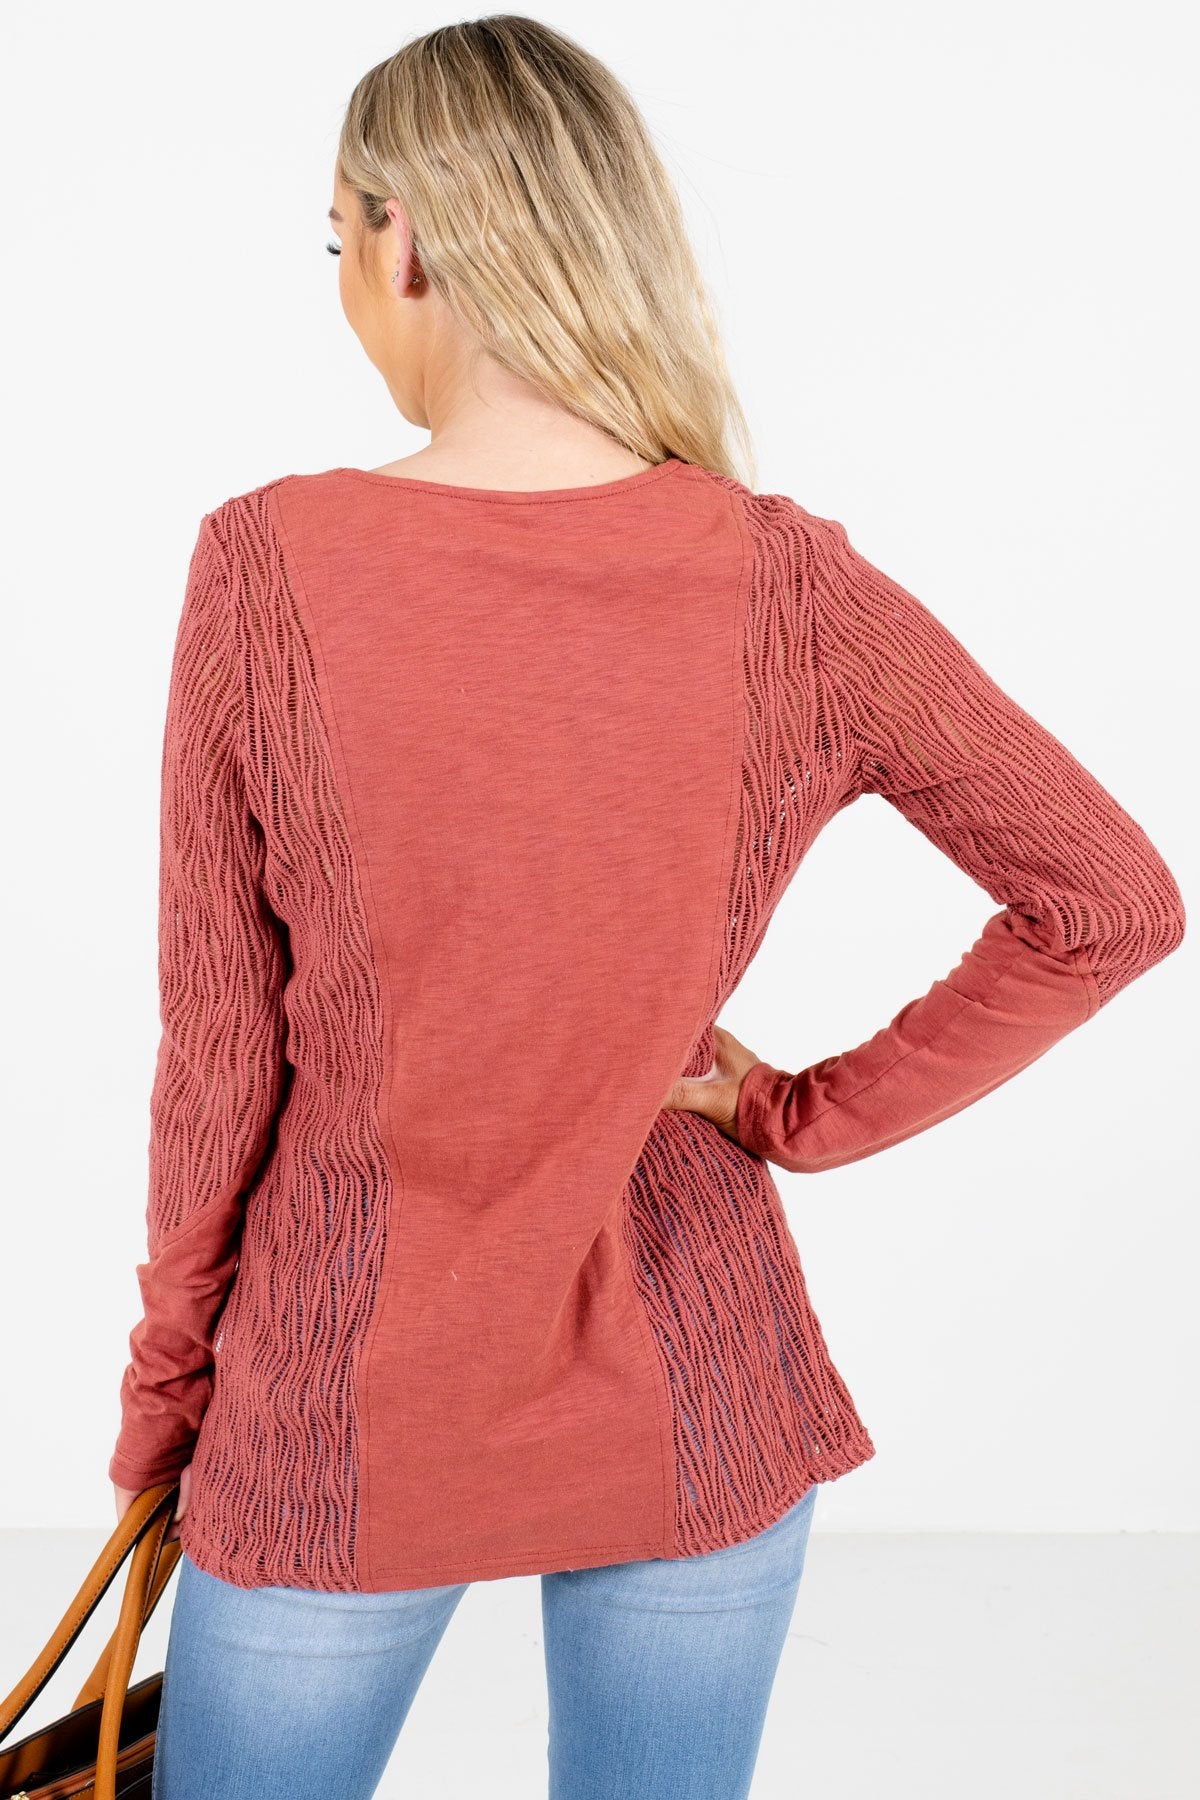 Women’s Coral Semi-Sheer Boutique Tops